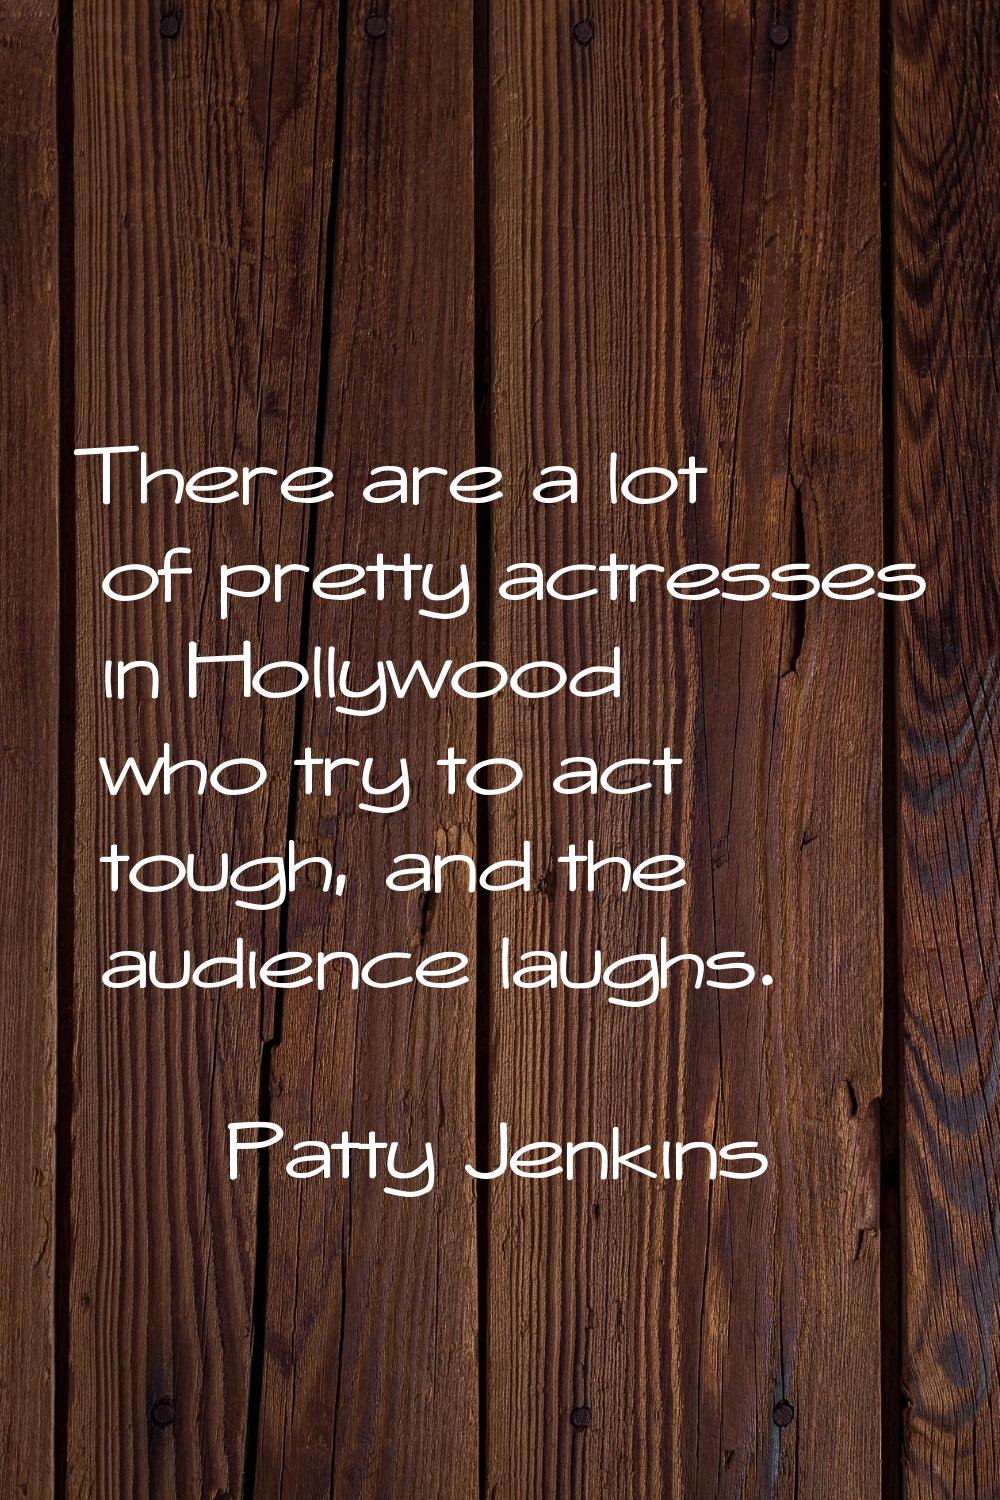 There are a lot of pretty actresses in Hollywood who try to act tough, and the audience laughs.